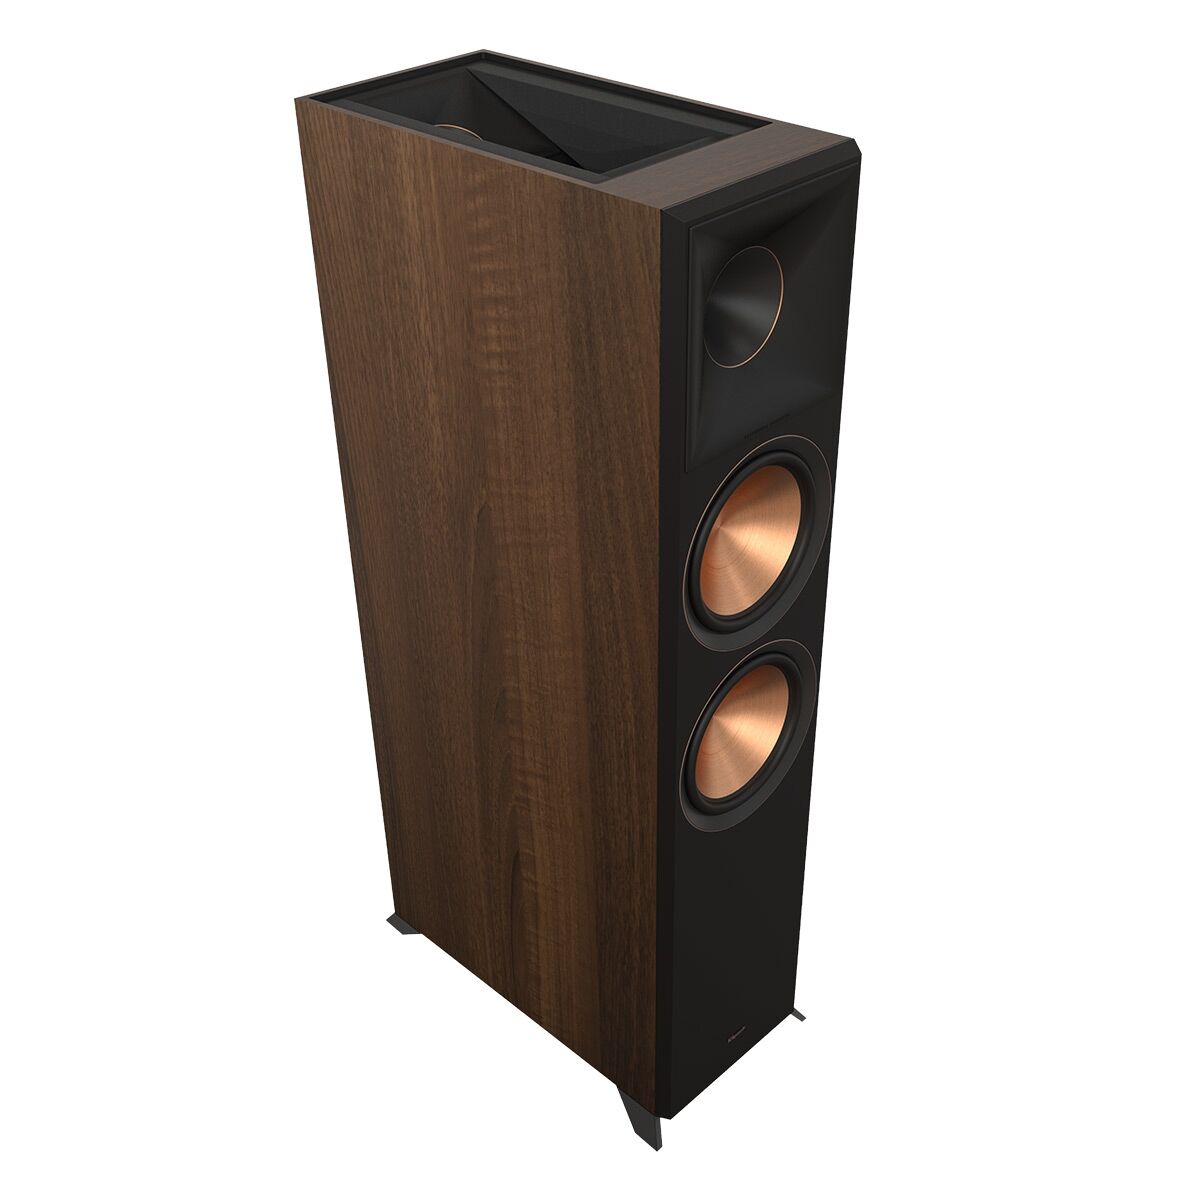 Klipsch Rp-8060FA Ii Reference Premiere Floorstanding Speaker with Dolby Atmos - Each - Walnut